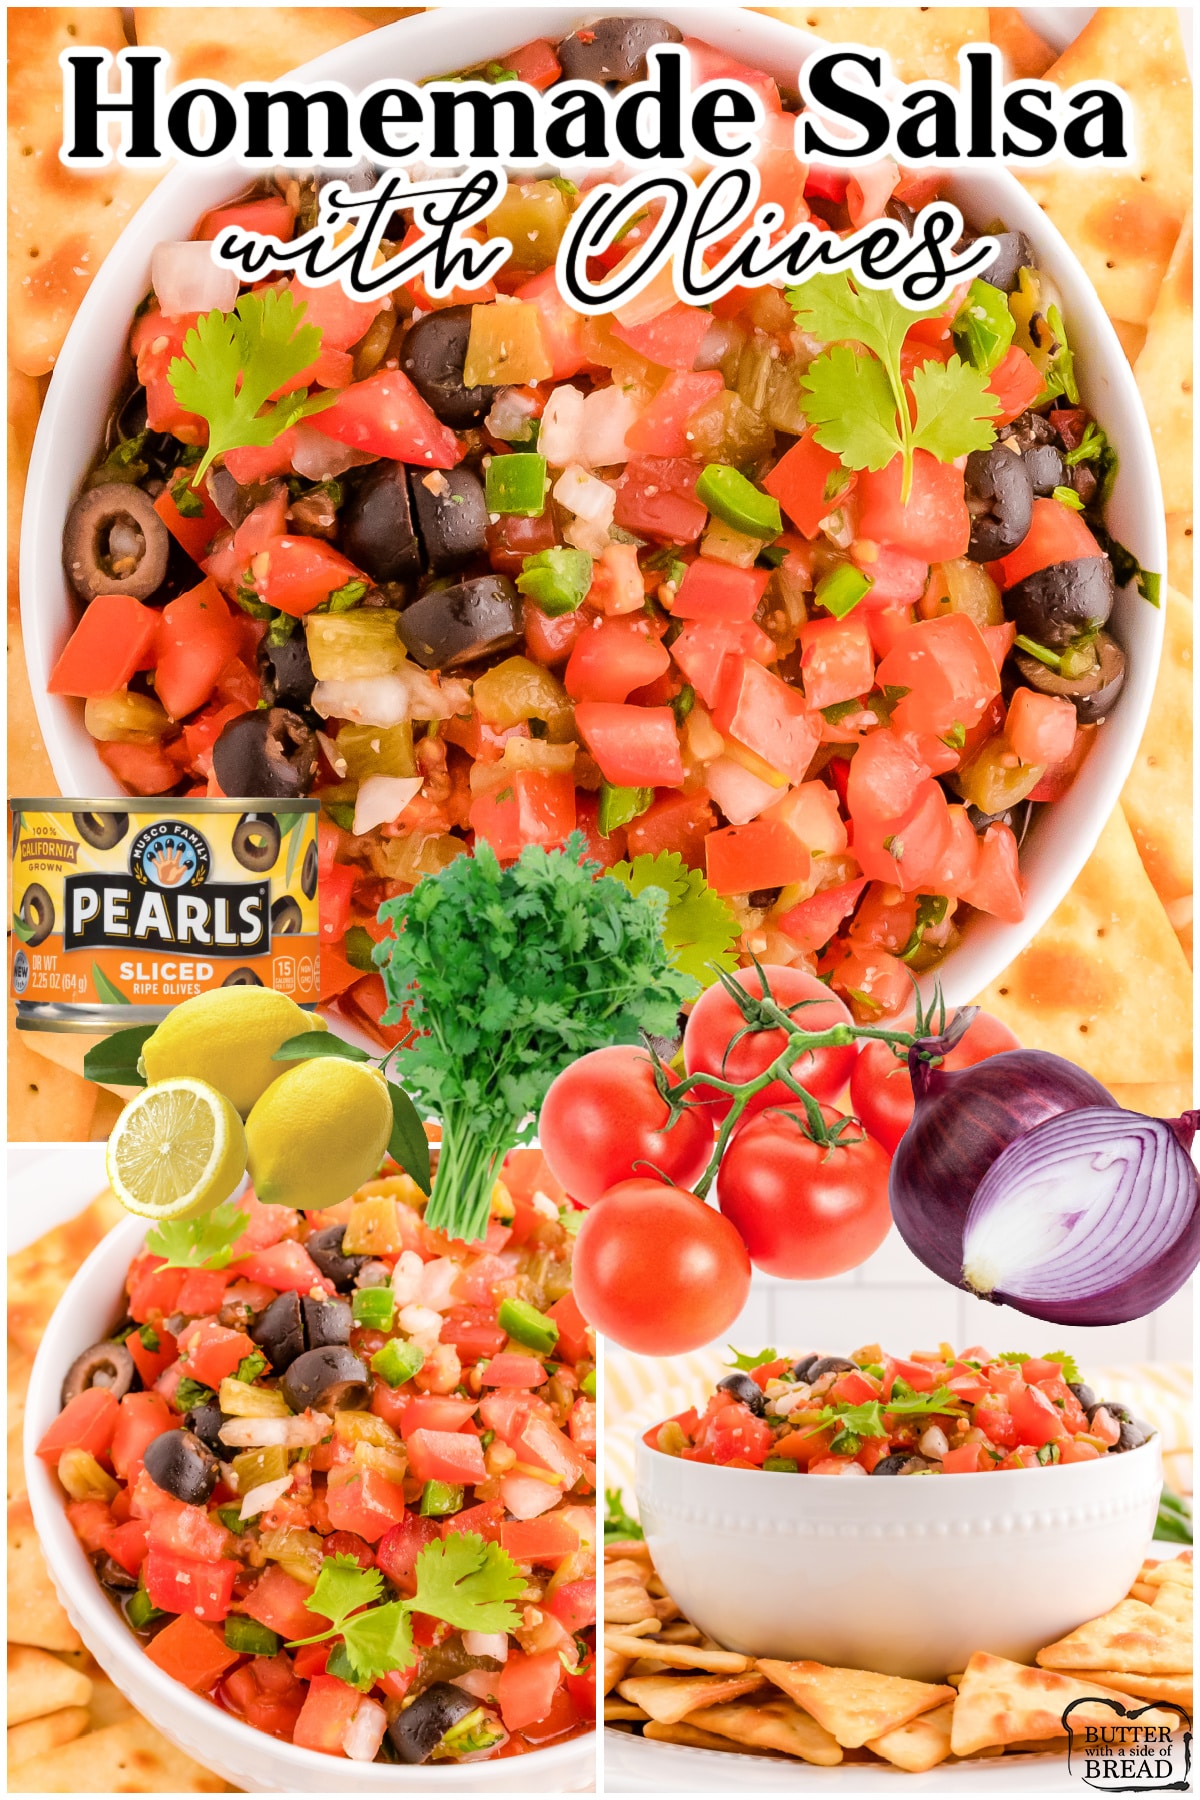 Fresh Garden Salsa with olives is a delightful take on traditional salsa, with green chiles & olives! Bright, fresh flavors in this fantastic homemade salsa, perfect for anytime of the day.